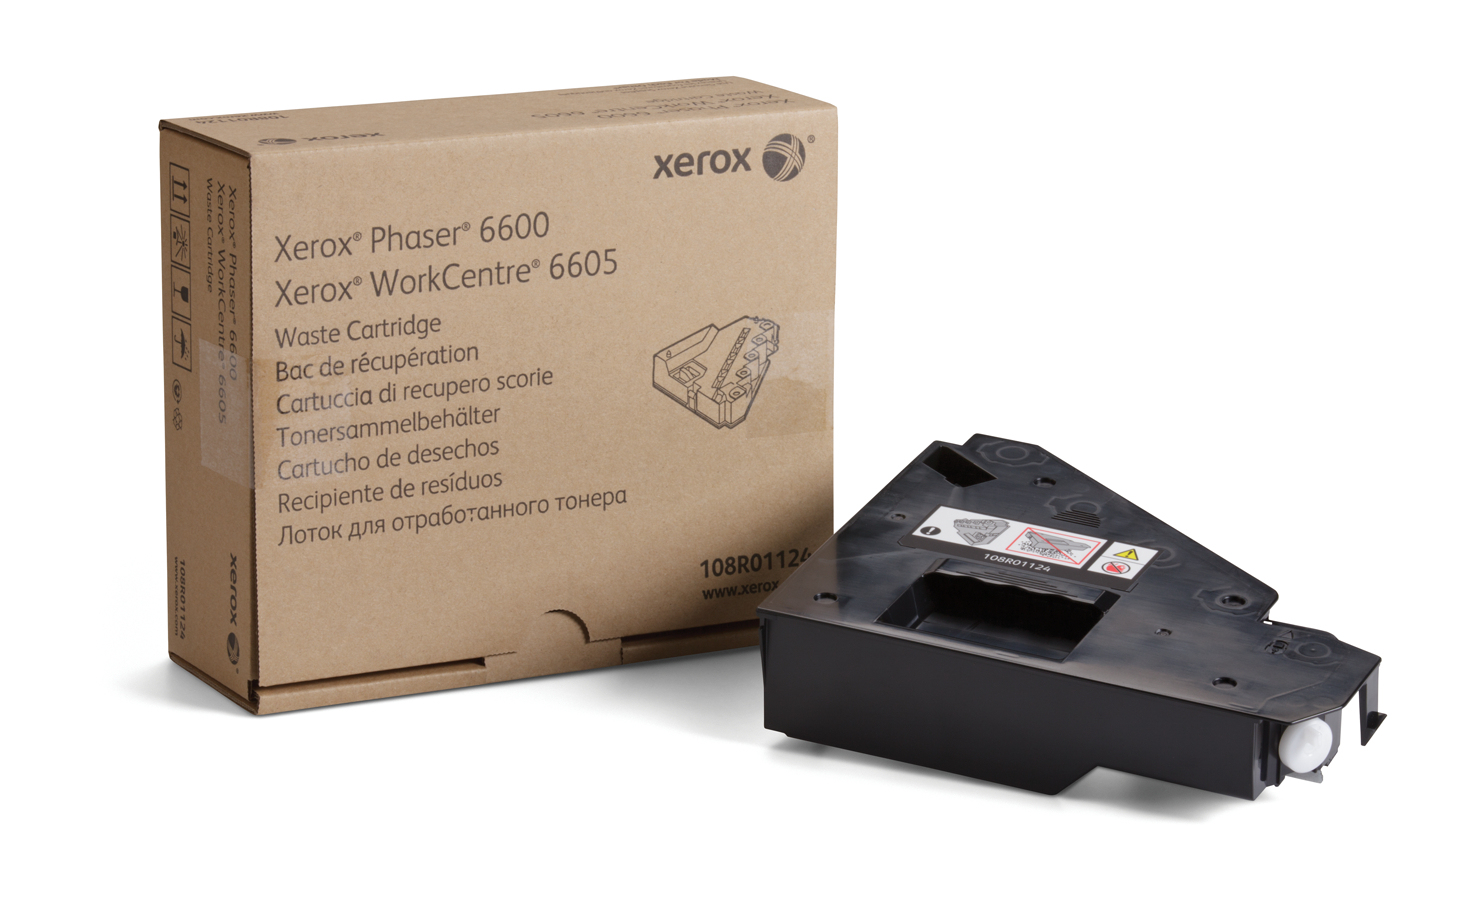 Xerox 108R01124 Toner waste box, 30K pages for Xerox Phaser 6600